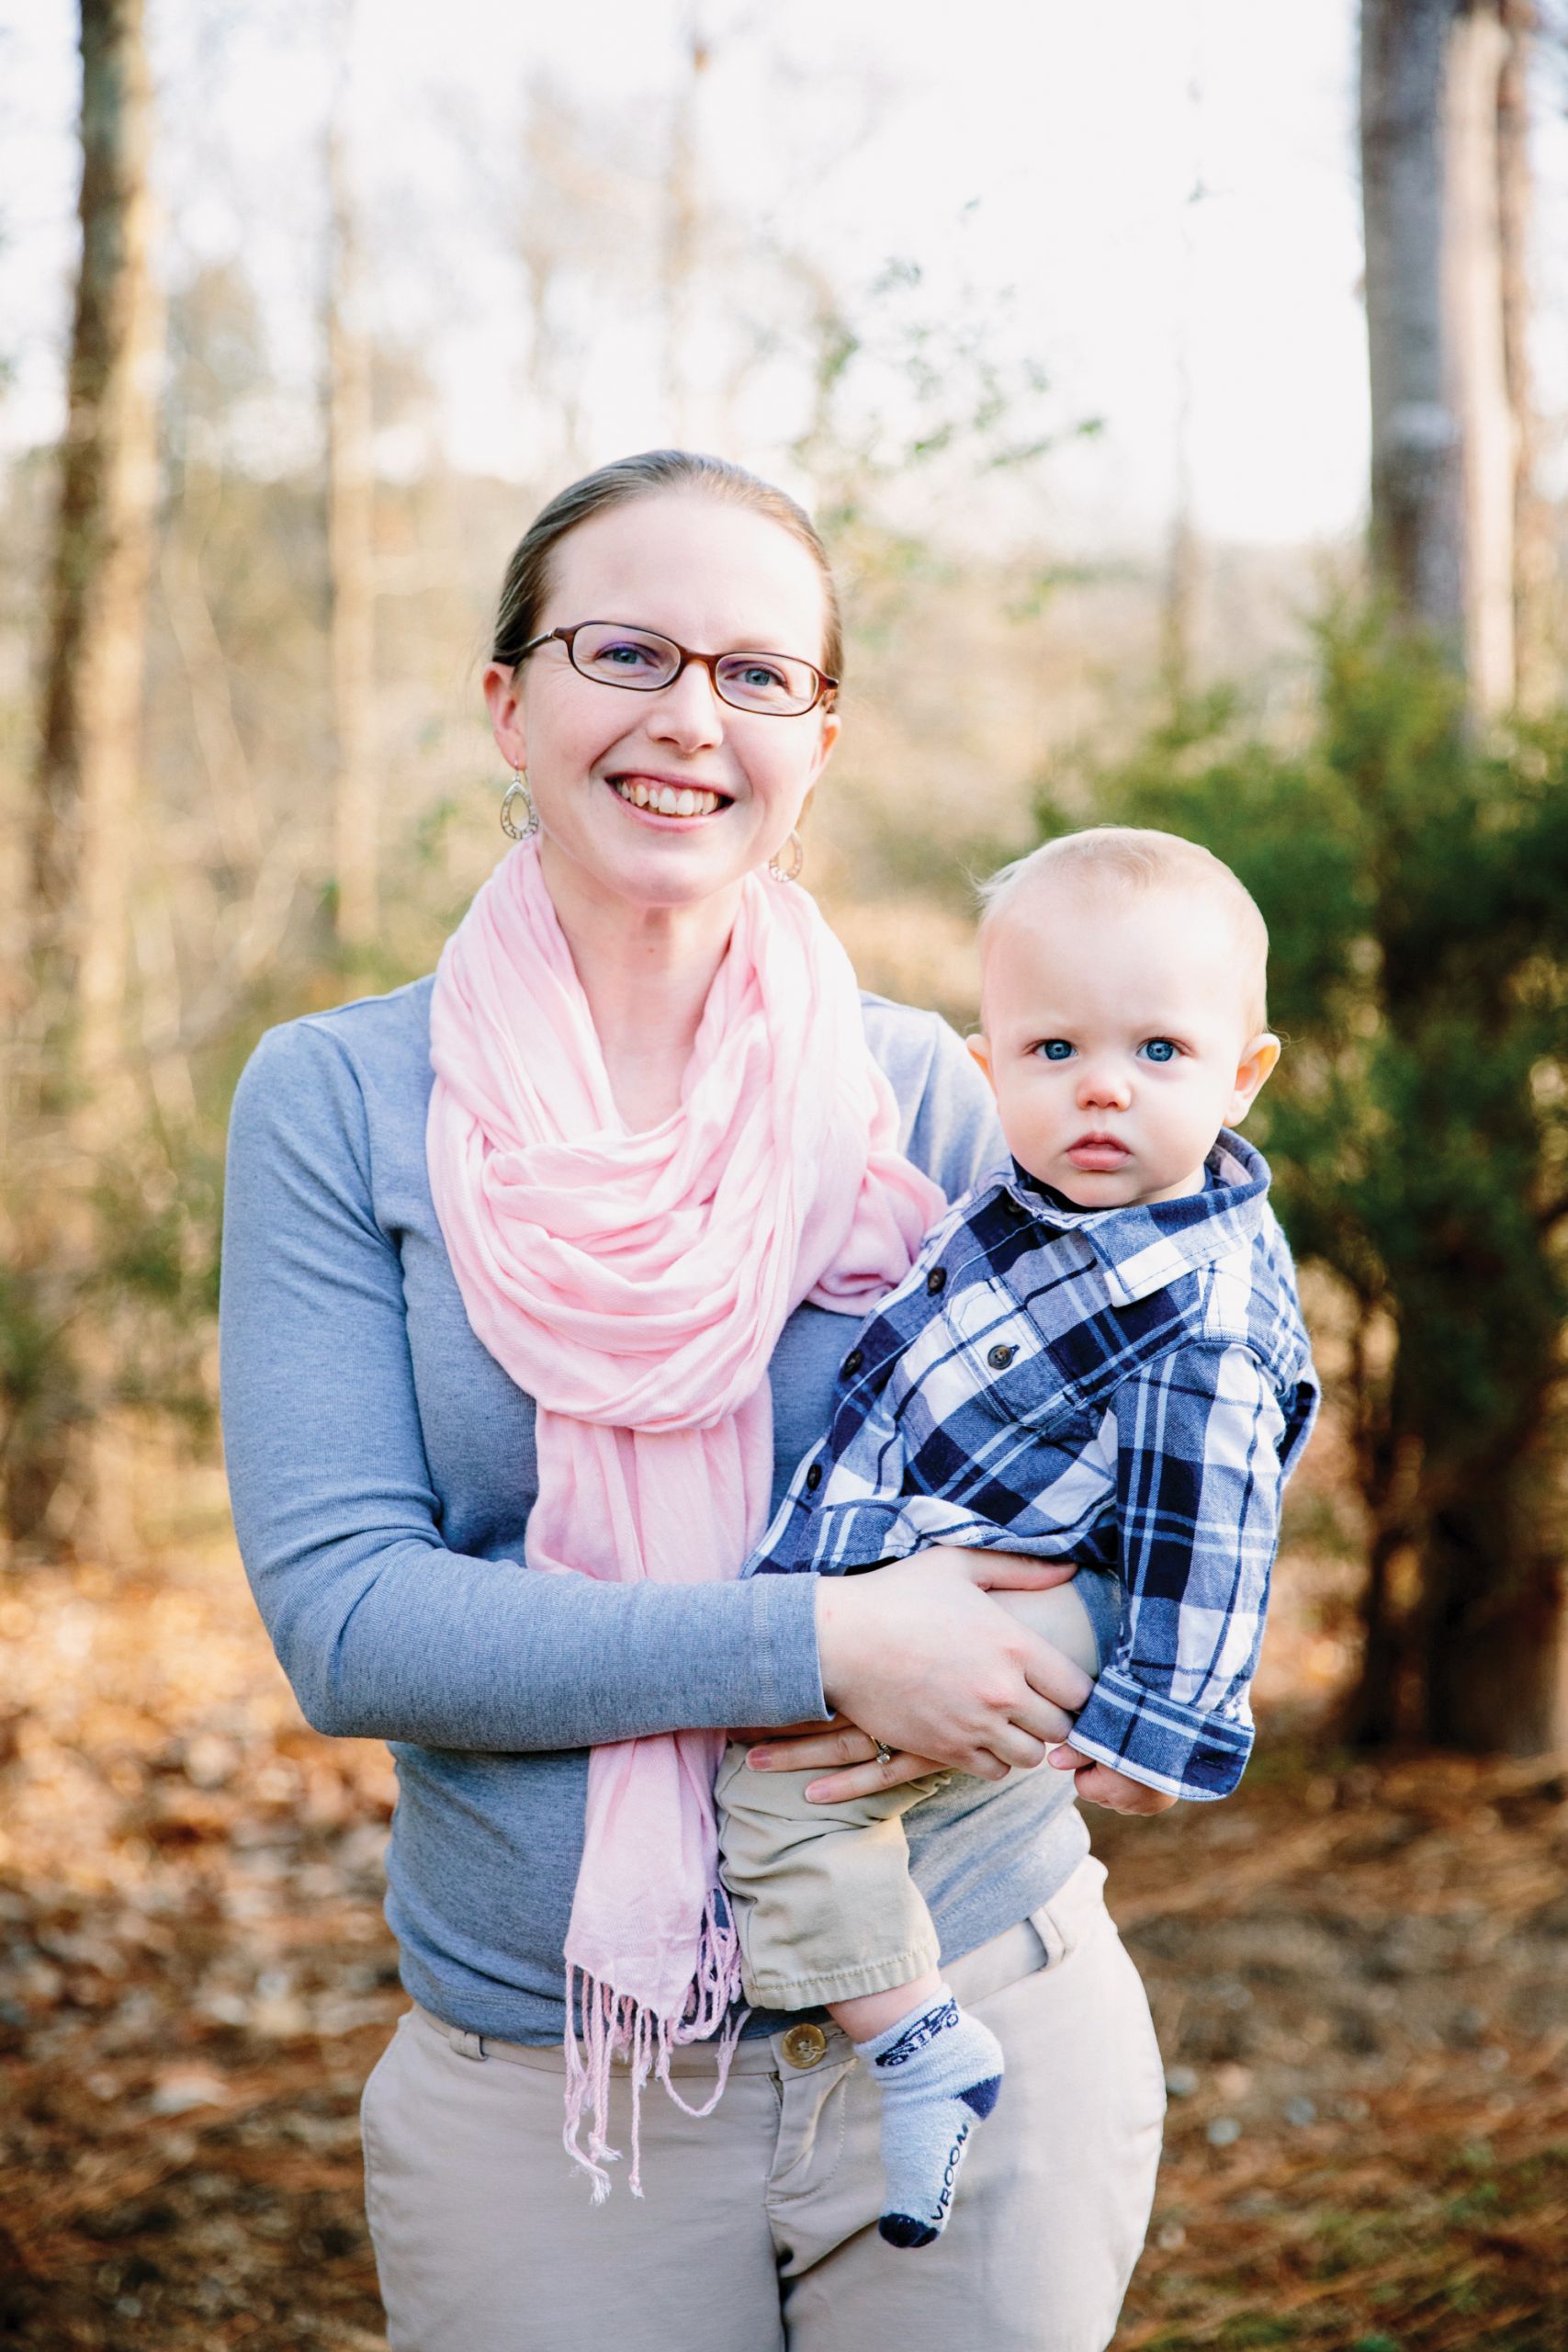 Lazear was pregnant with her son, Nate, when she started Zika research at UNC. (Photo by Anna Routh Barzin ’07)